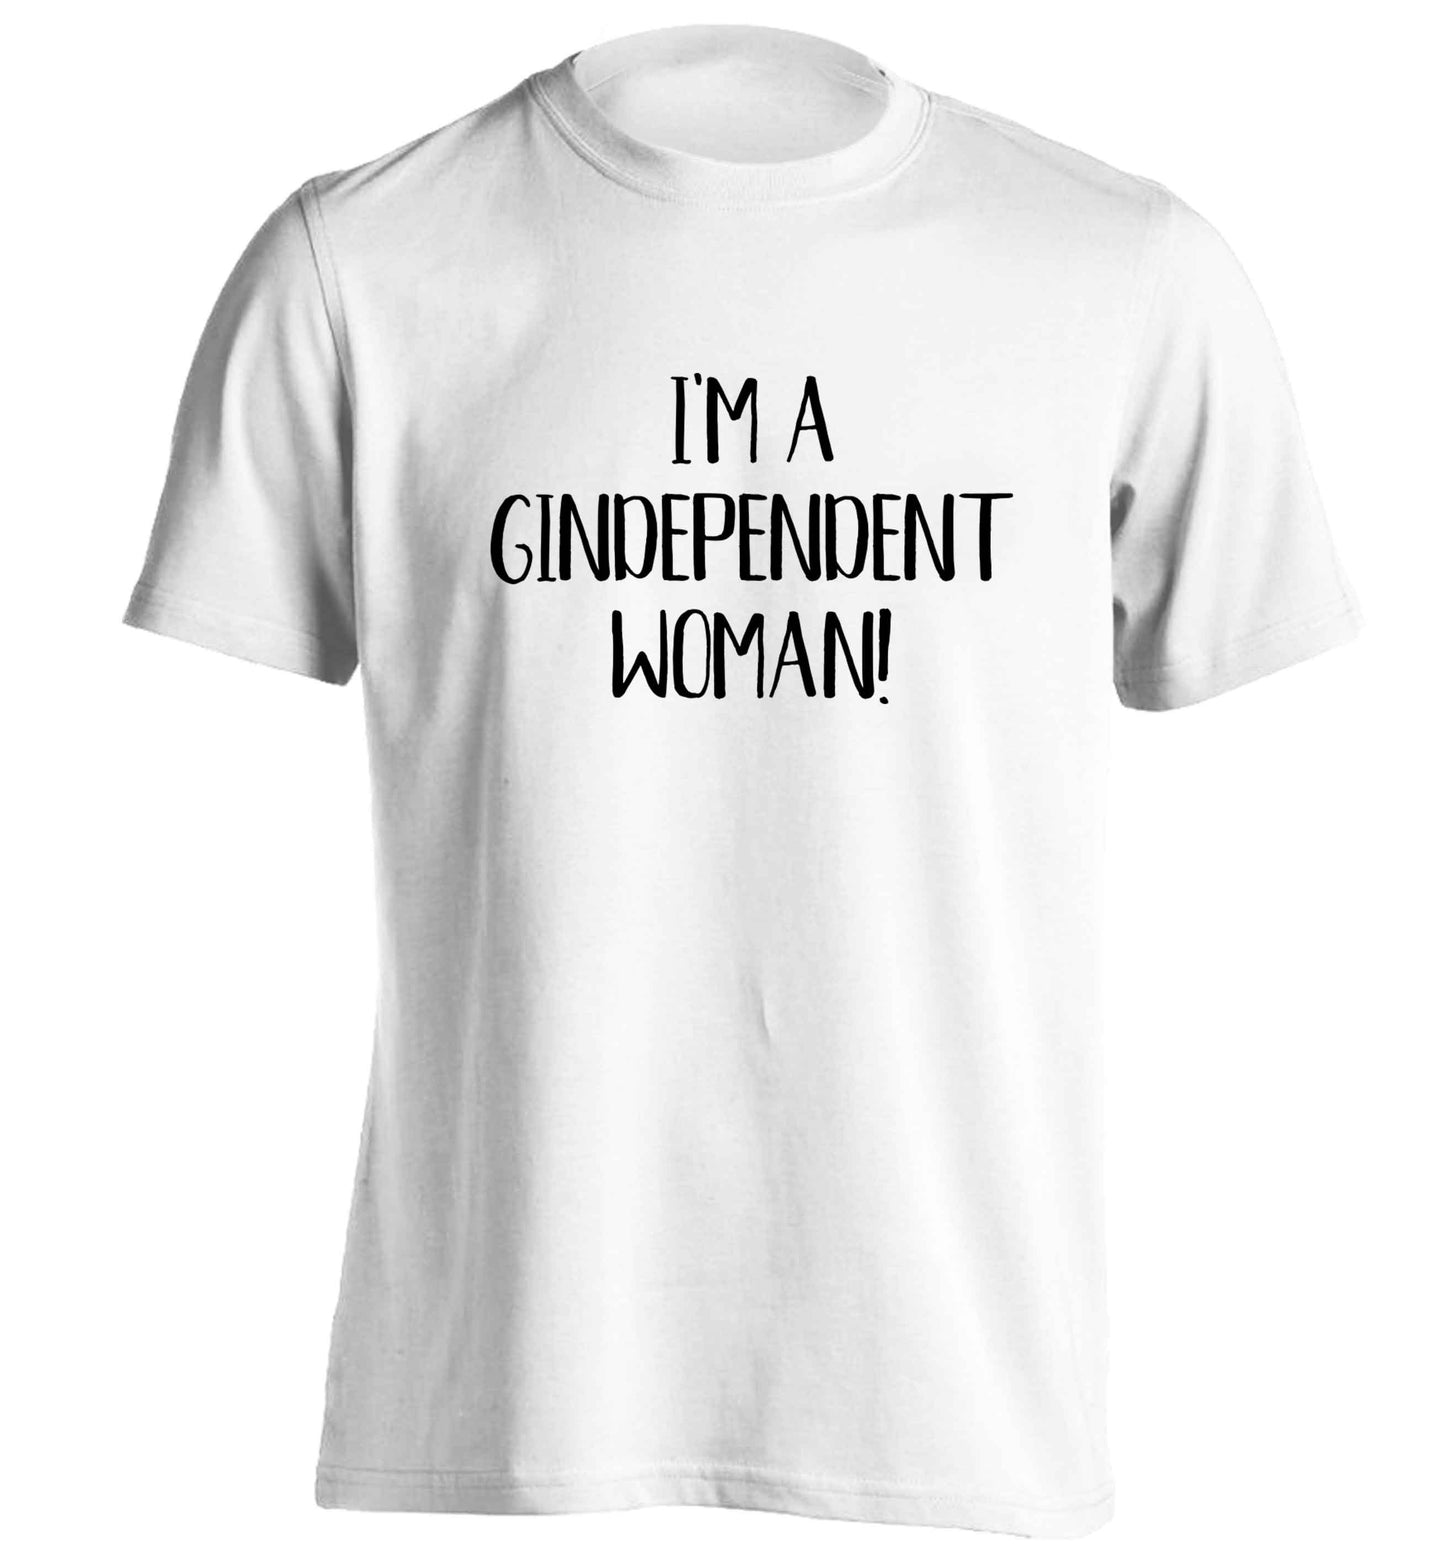 I'm a gindependent woman adults unisex white Tshirt 2XL